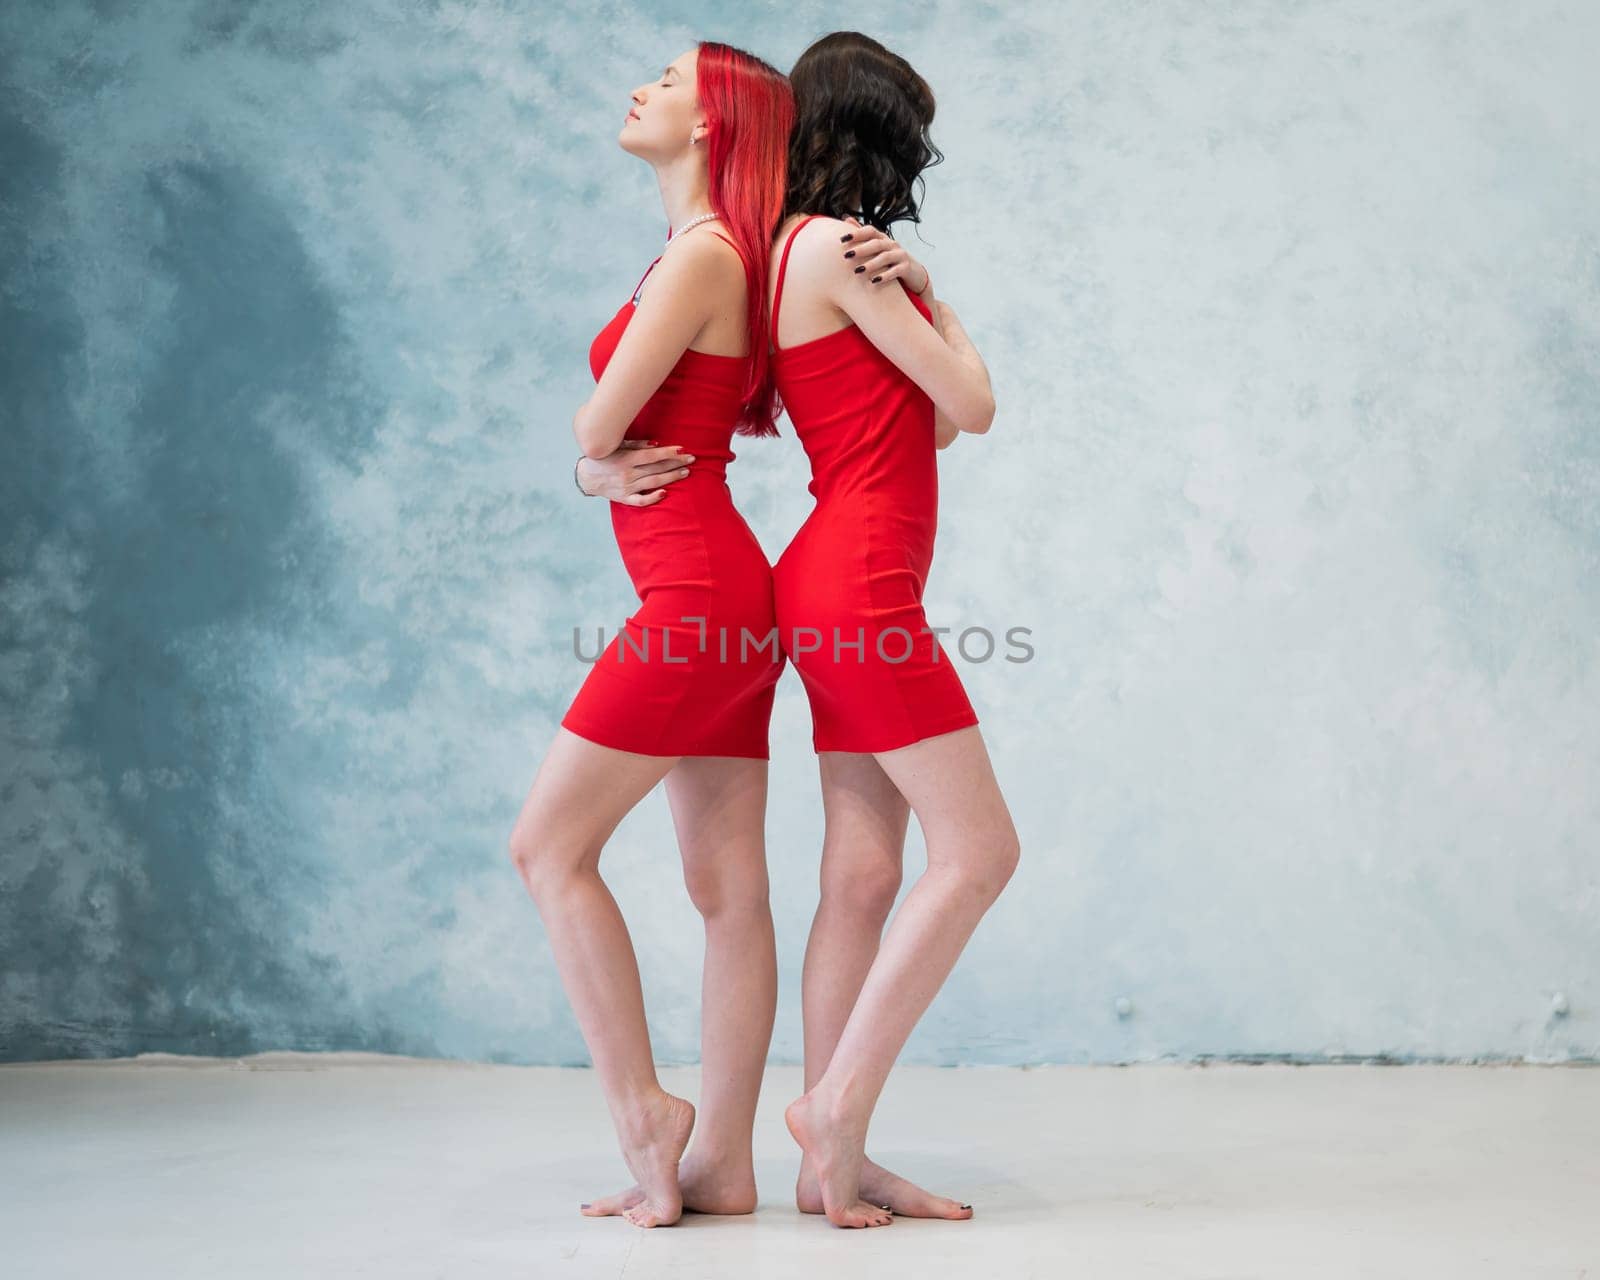 A full-length portrait of two women dressed in identical red dresses and standing back to back. Lesbian intimacy. by mrwed54